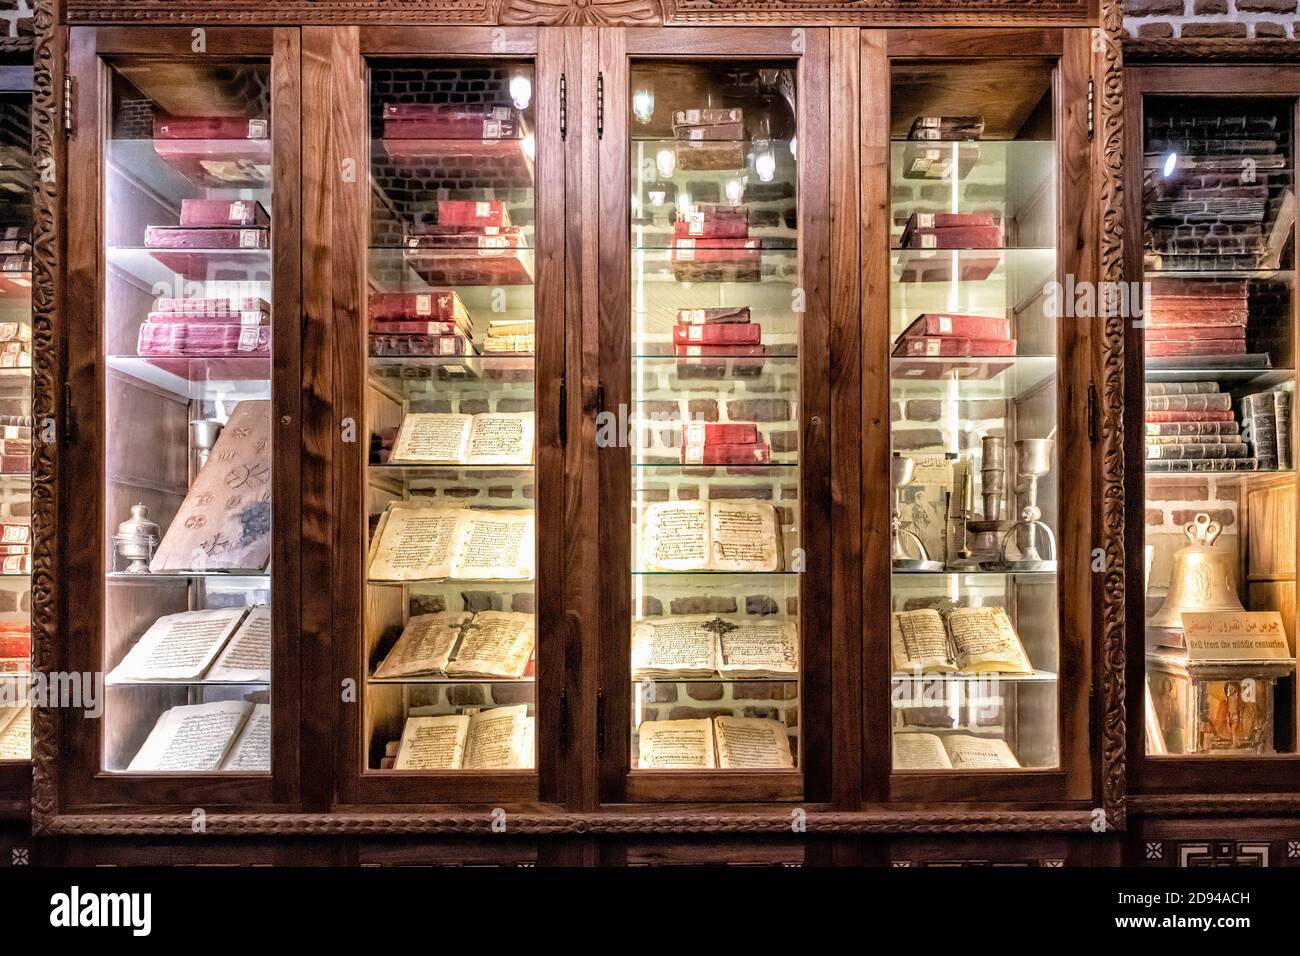 Display of ancient relics, including historic Bibles, in a cabinet at the Saints Sergius and Bacchus Church in Coptic Cairo Stock Photo